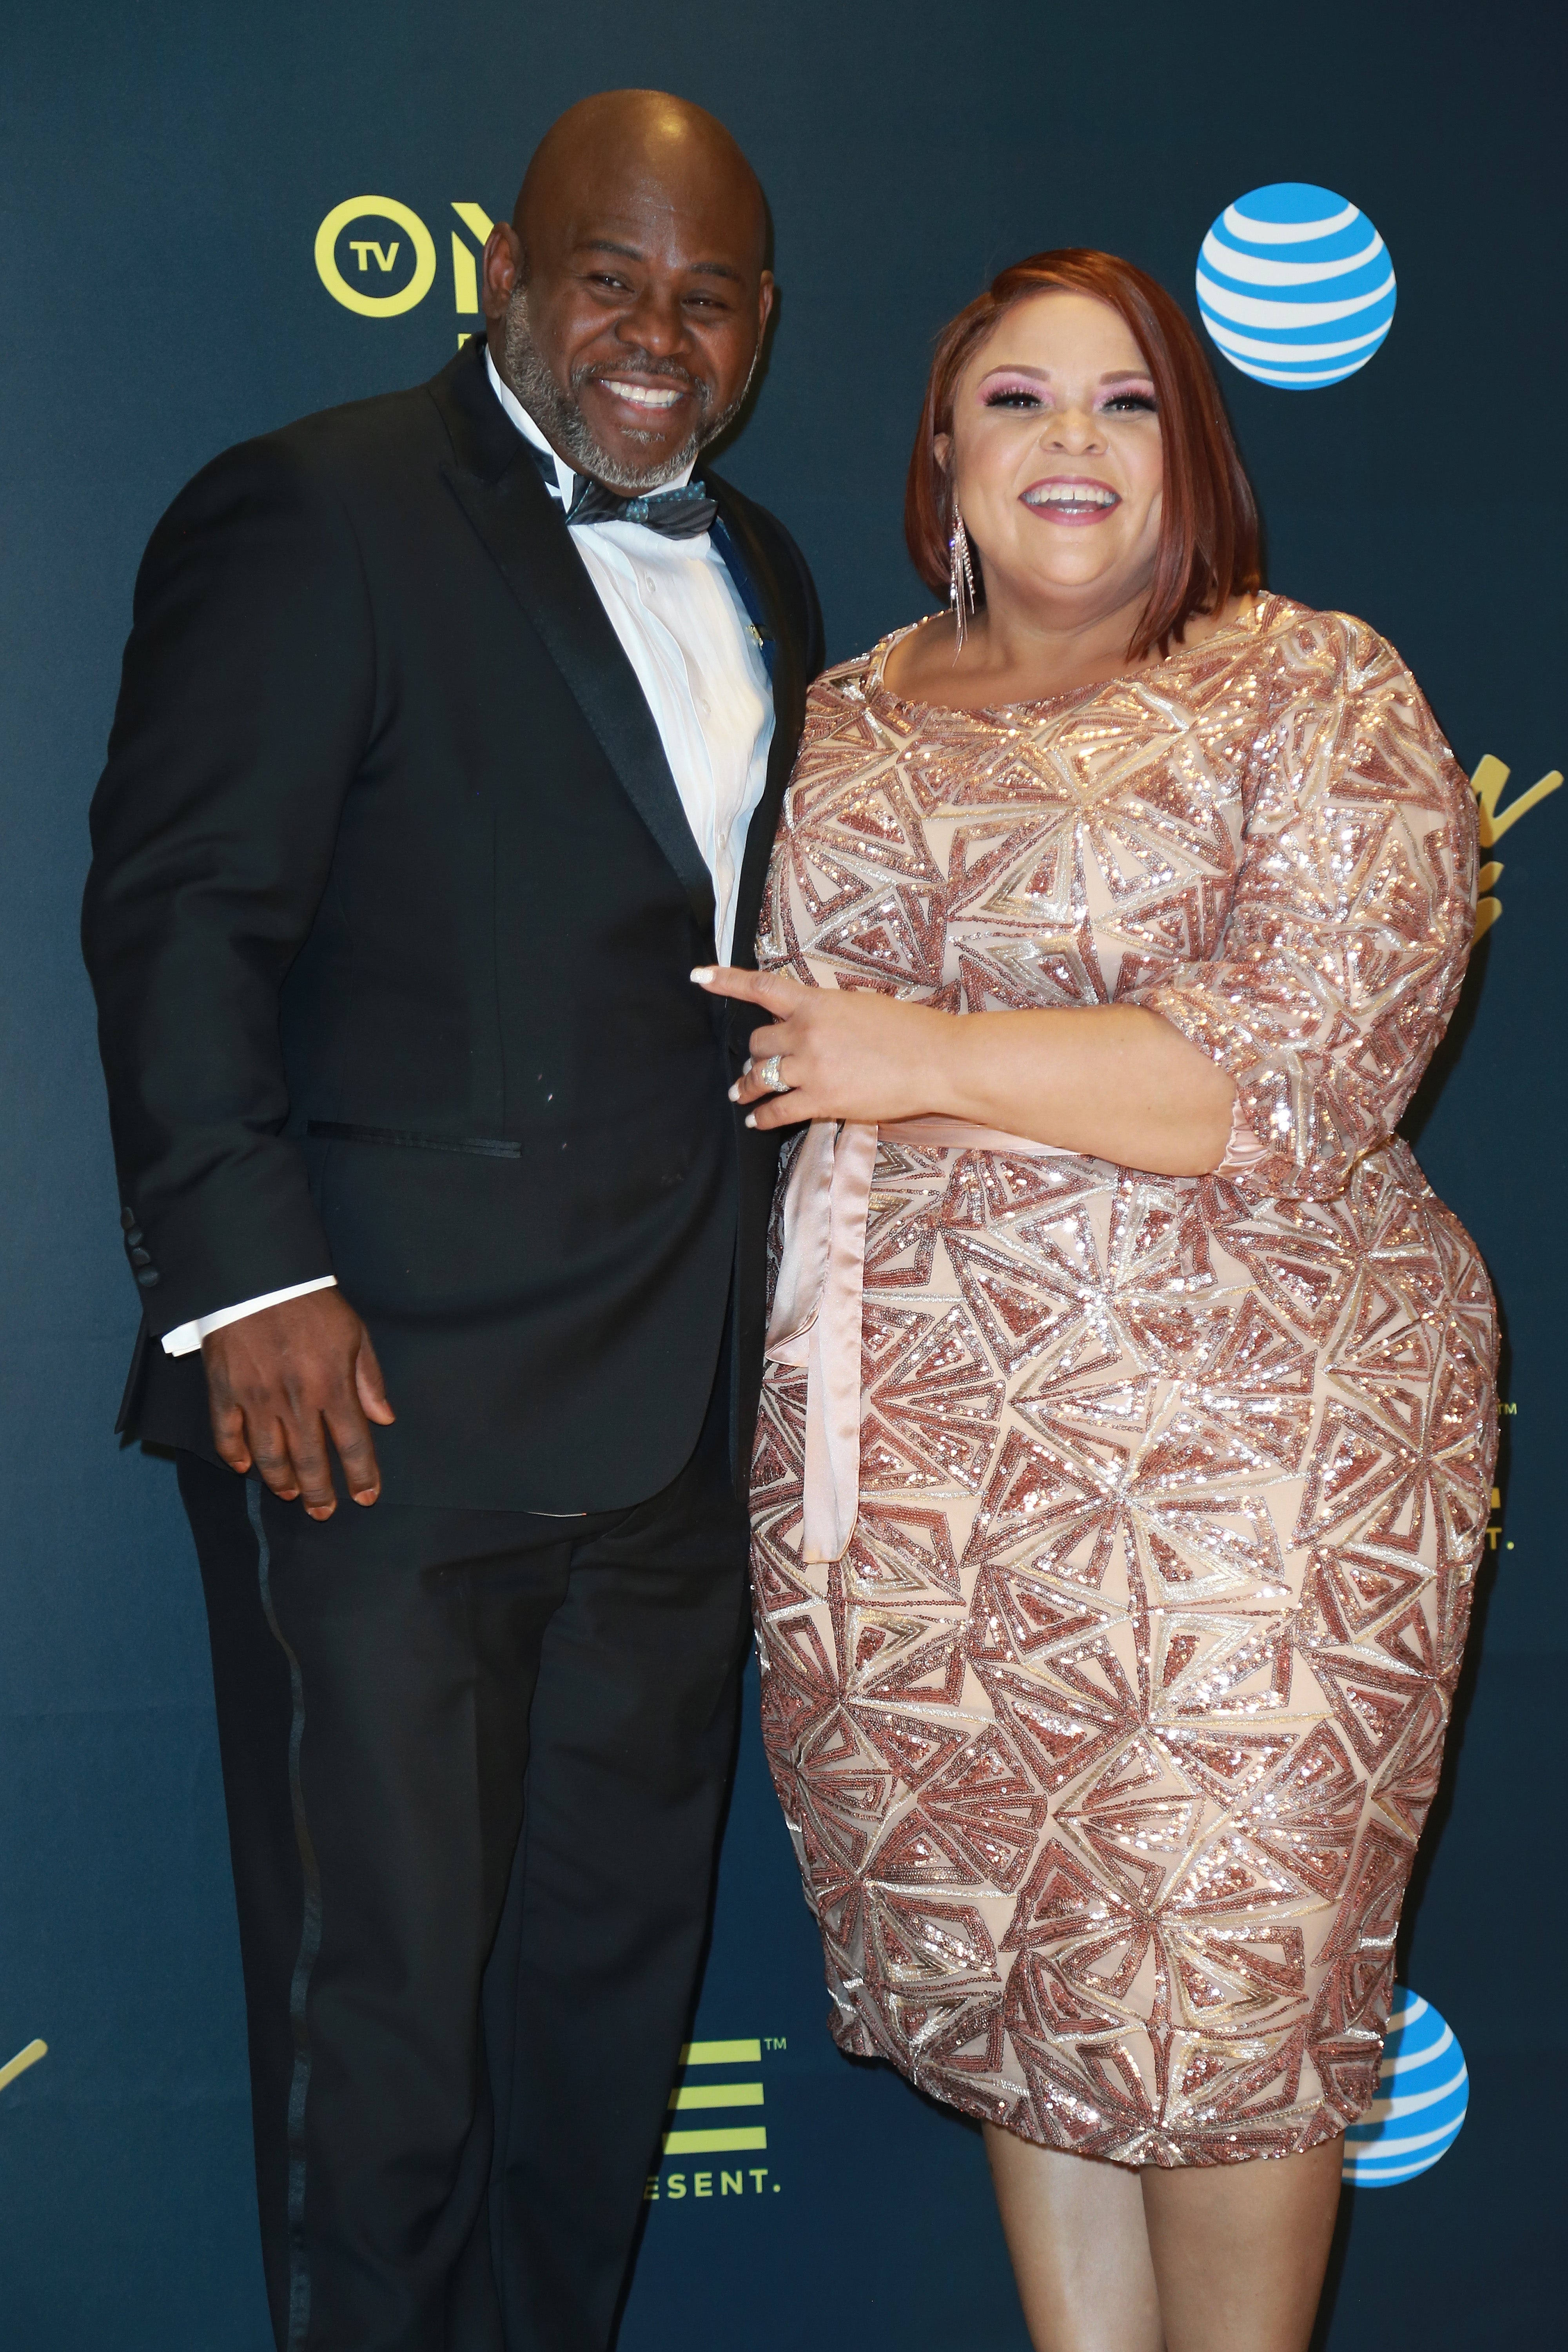 A Look At David And Tamela Mann's Love Through The Years
